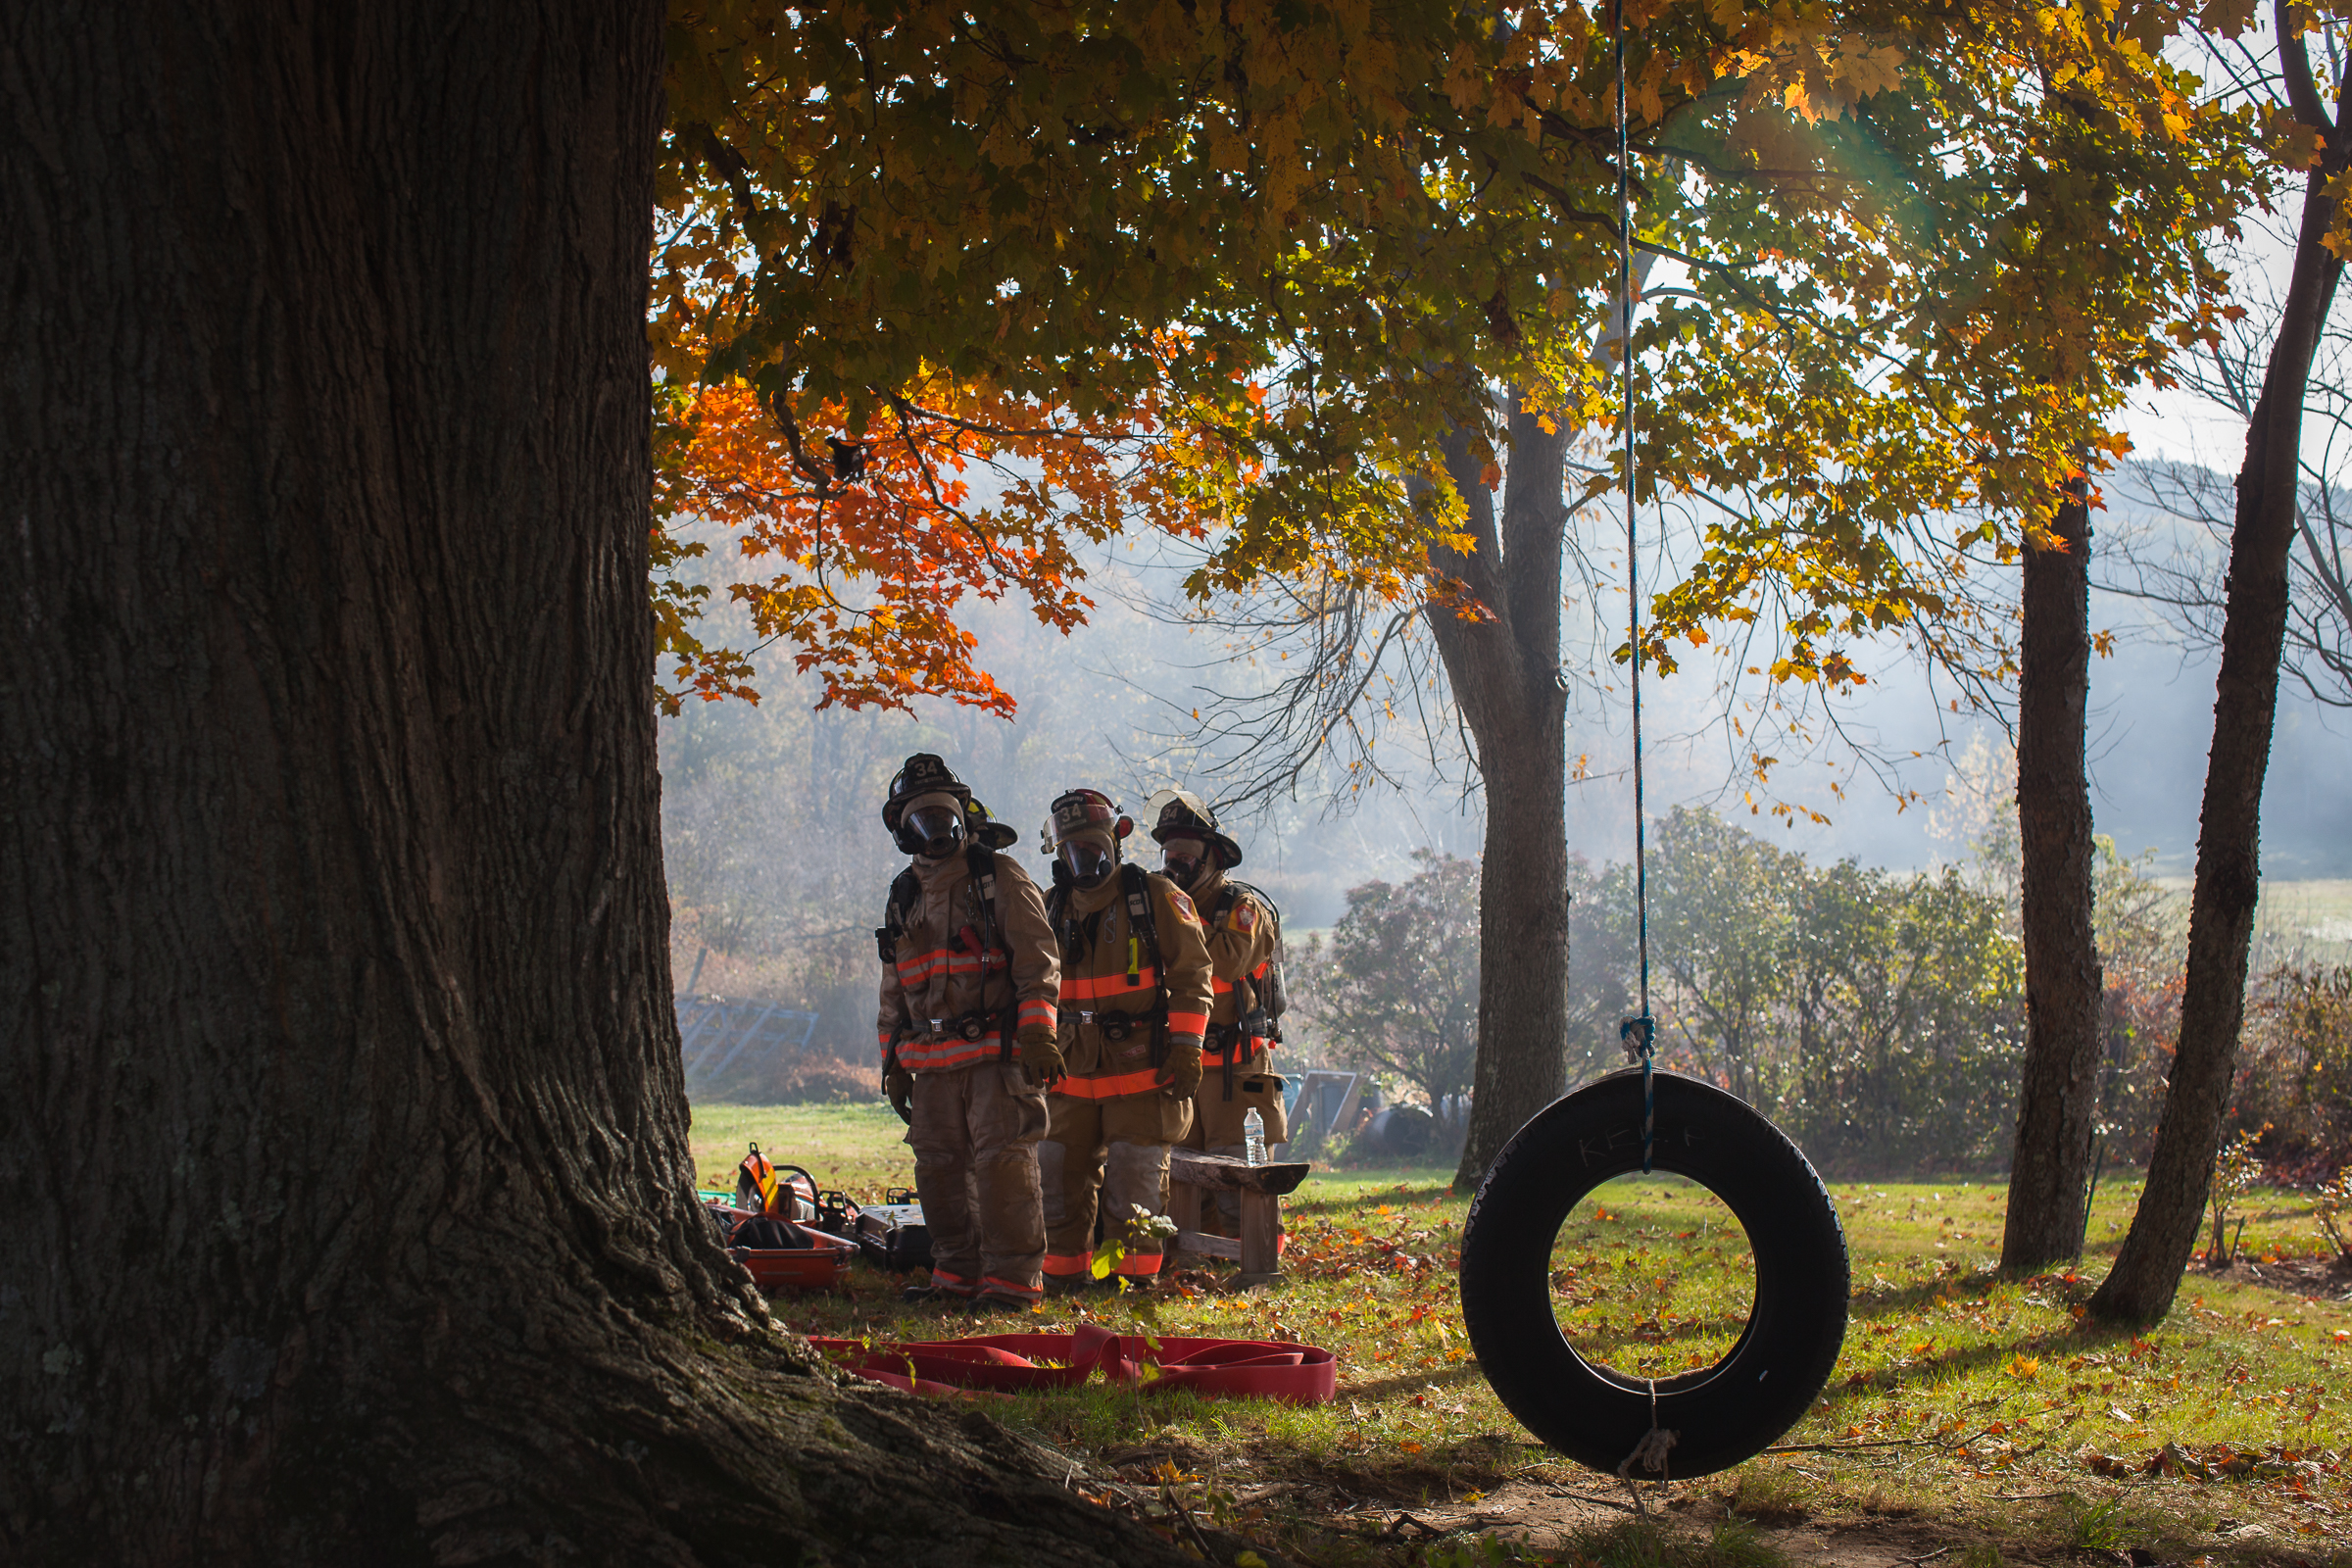 Men Outdoors Group Of People Trees Firefighers Fireman Gas Masks Tire Fall Leaves Nature 2400x1600